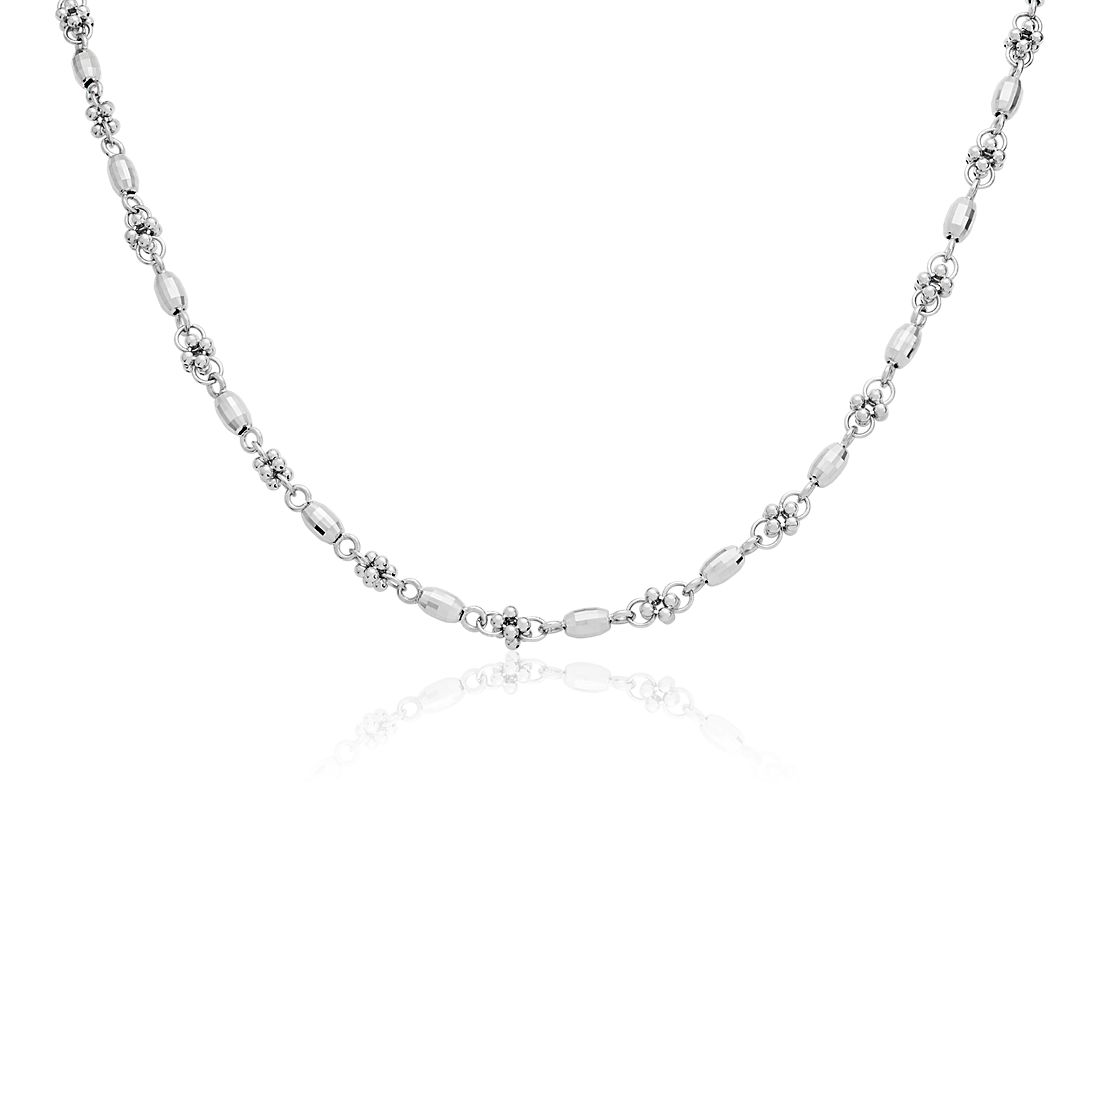 Faceted Cluster Necklace in 14k Italian White Gold